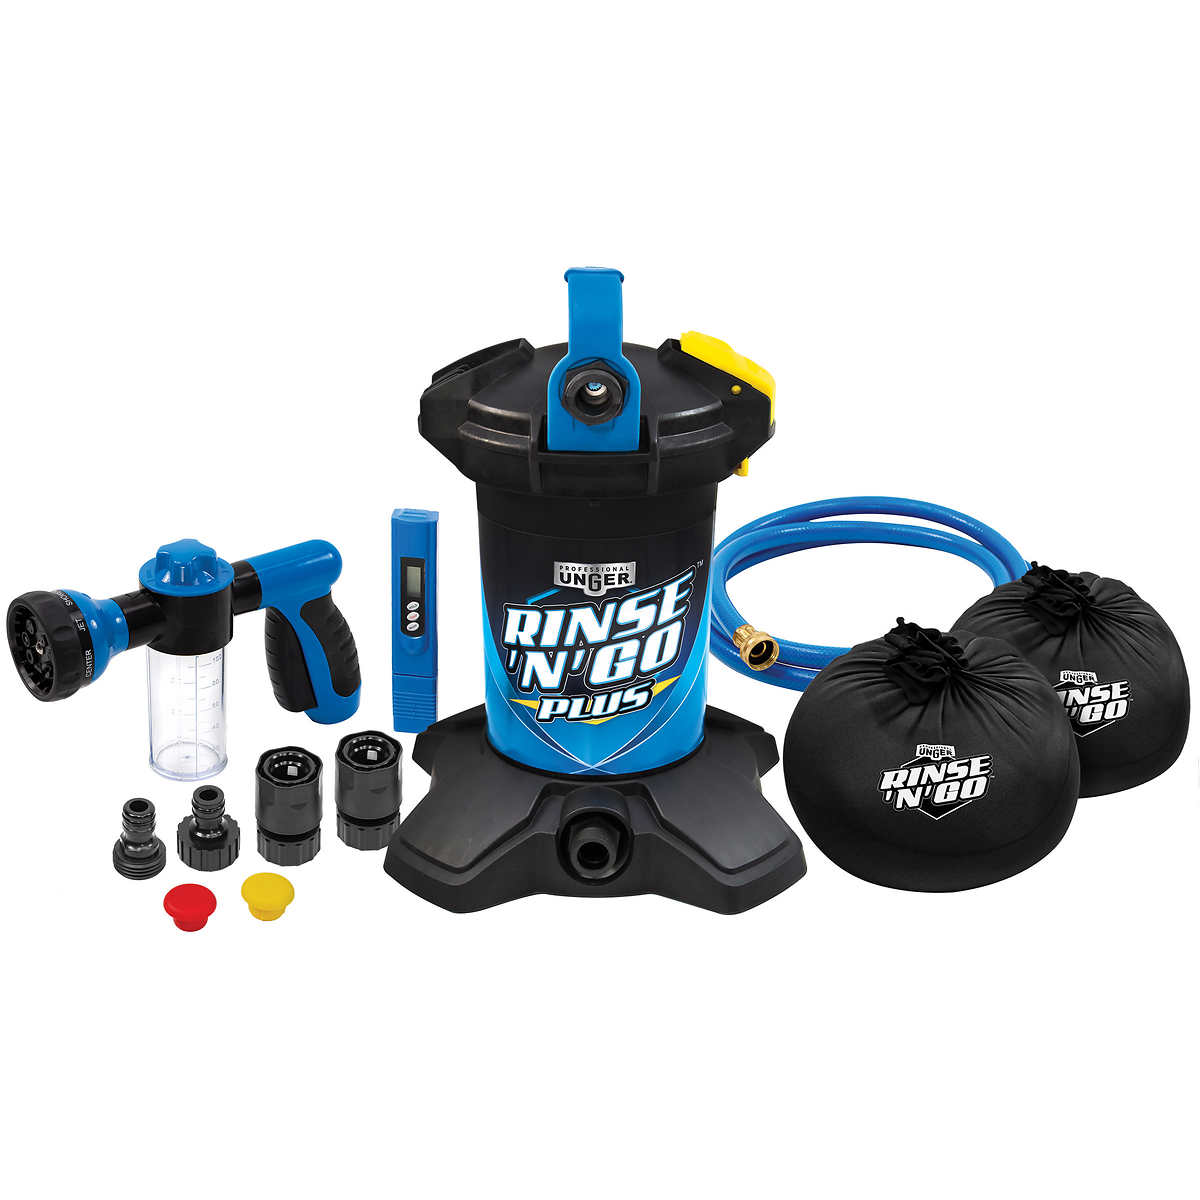 Unger Professional Rinse'n'Go Plus Spotless Car Wash System